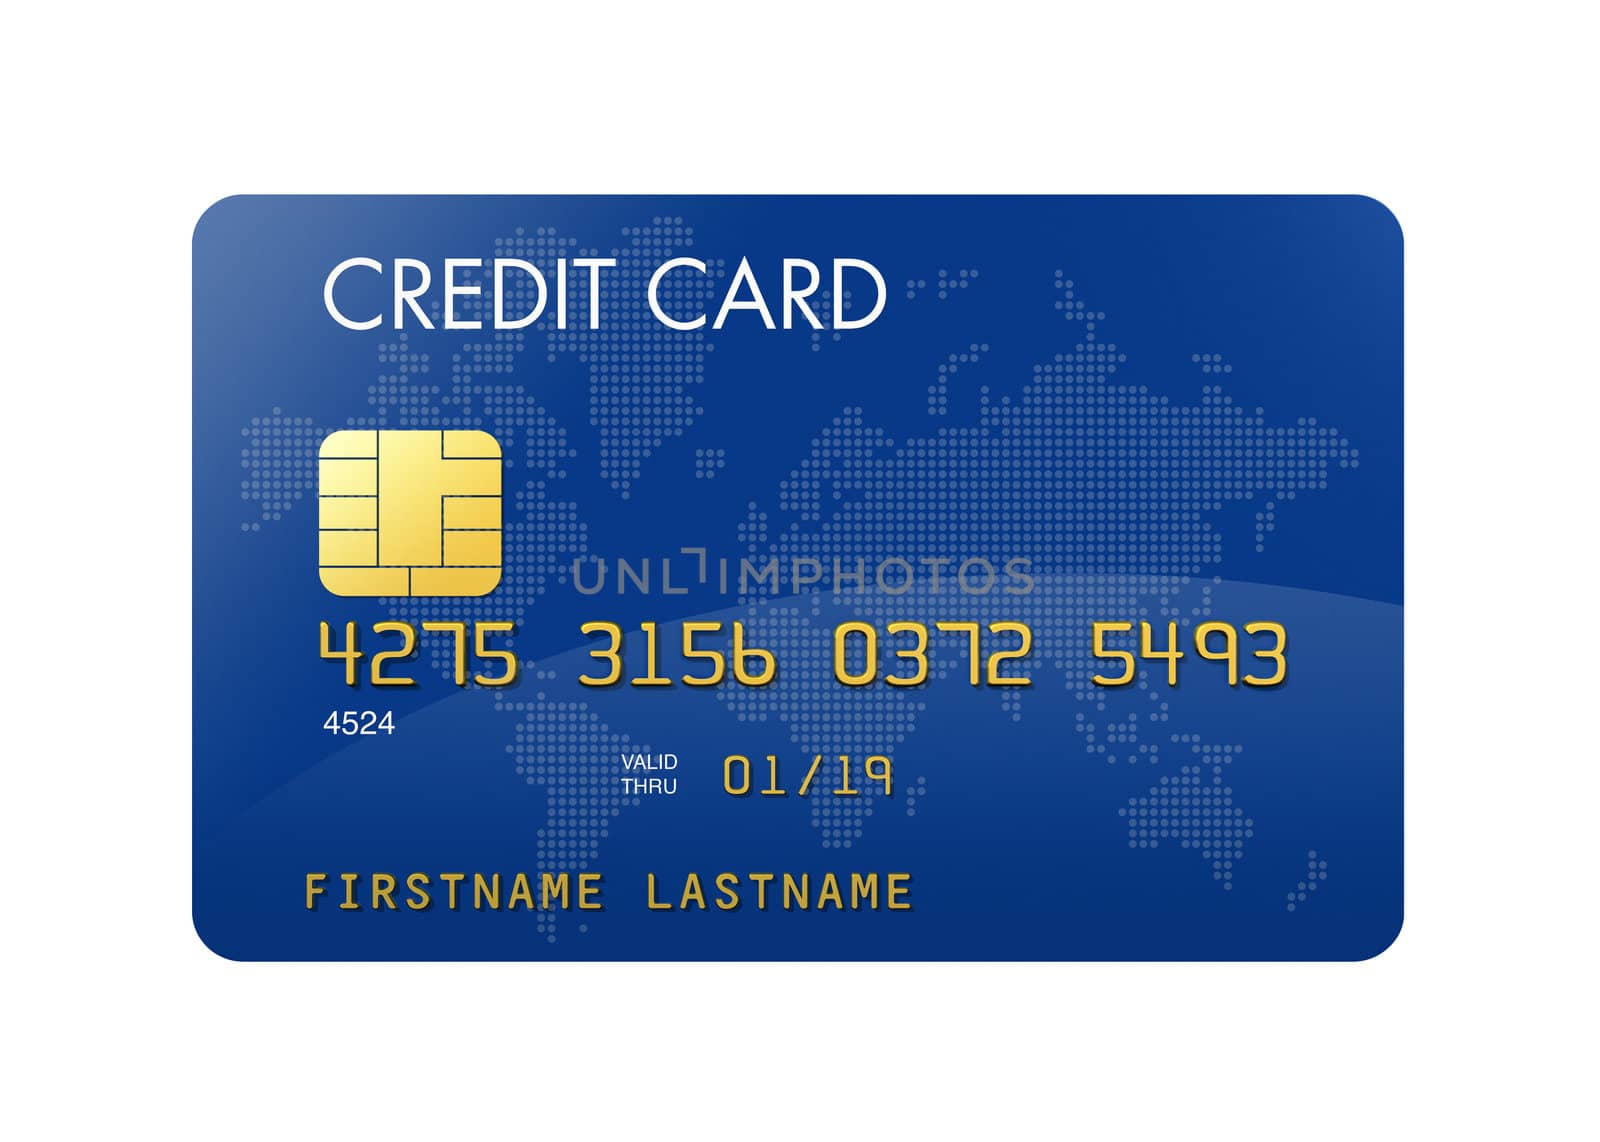 Blue credit card with world map - isolated on white with clipping path